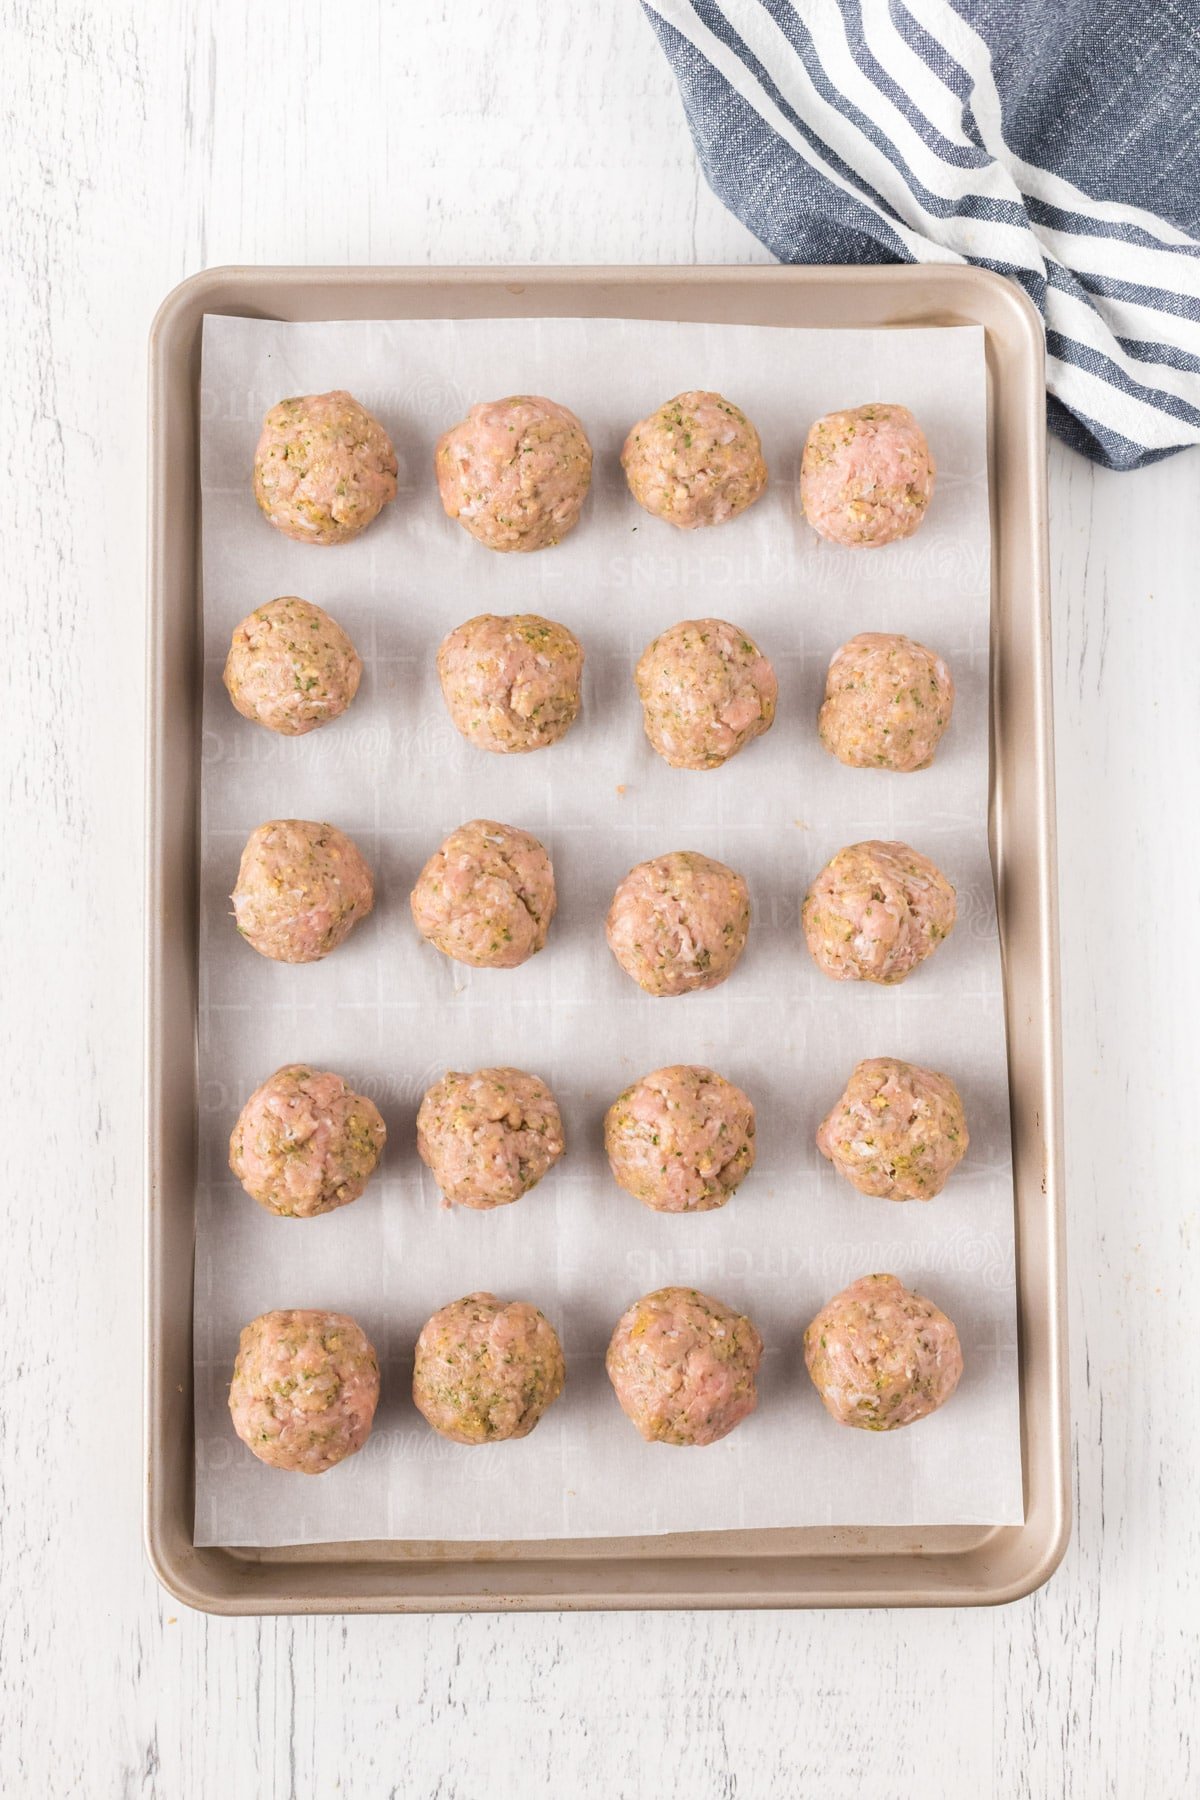 Rolled turkey meatballs on a baking sheet with parchment paper